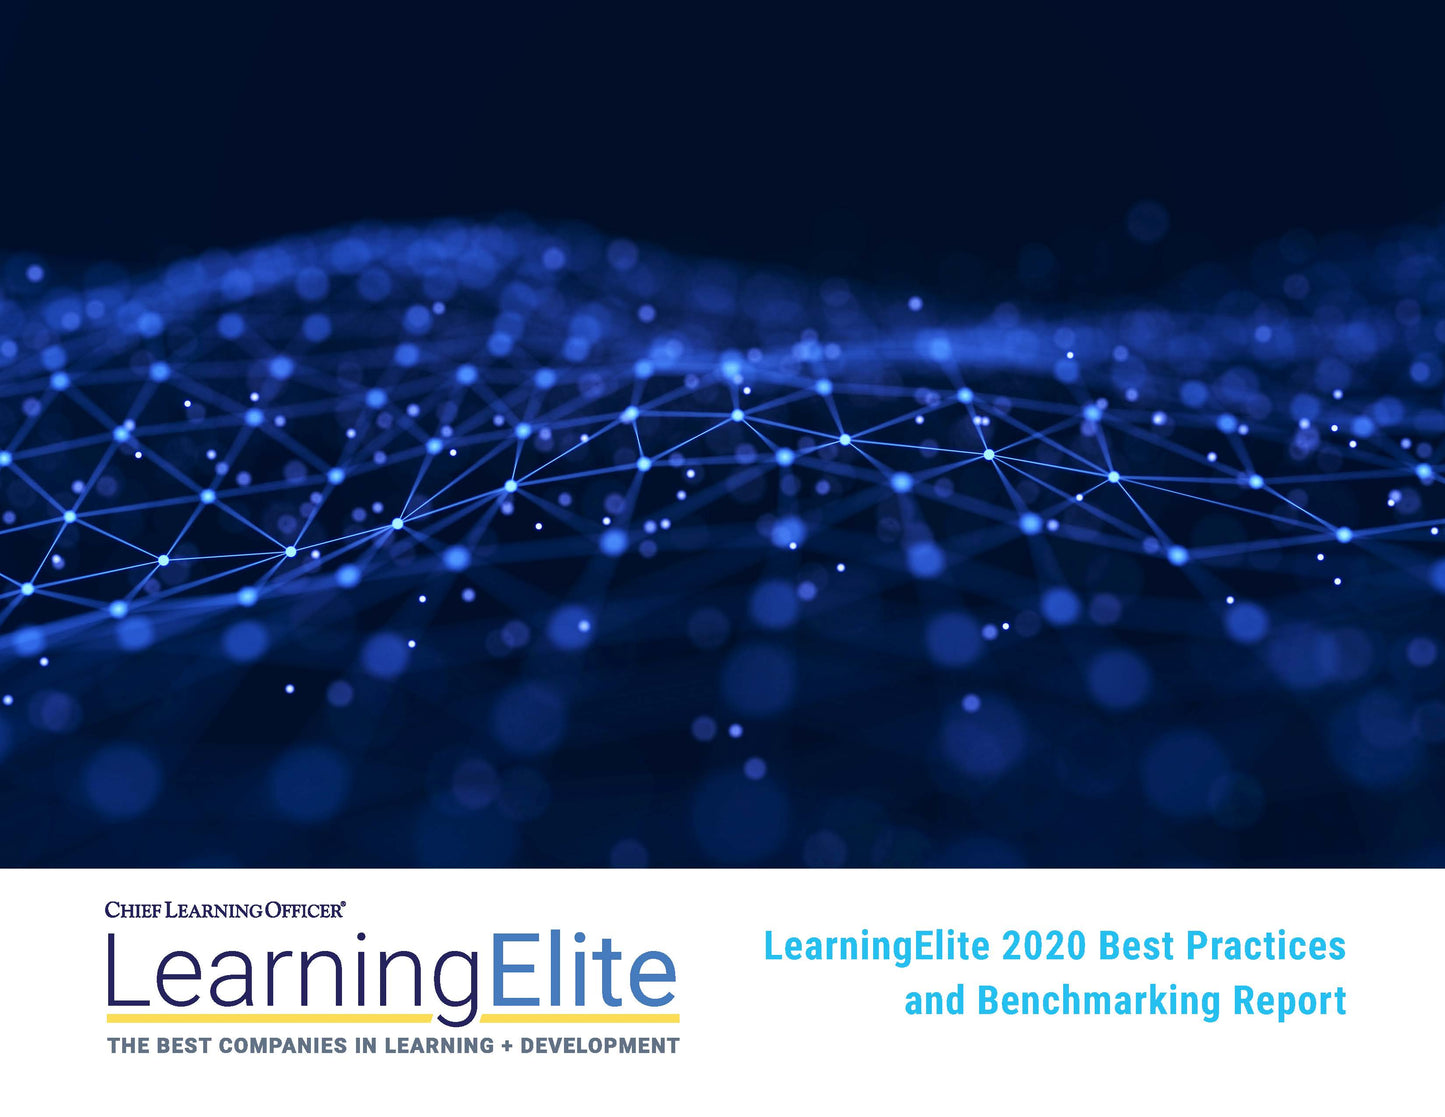 2020 LearningElite Best Practices and Benchmarking Report